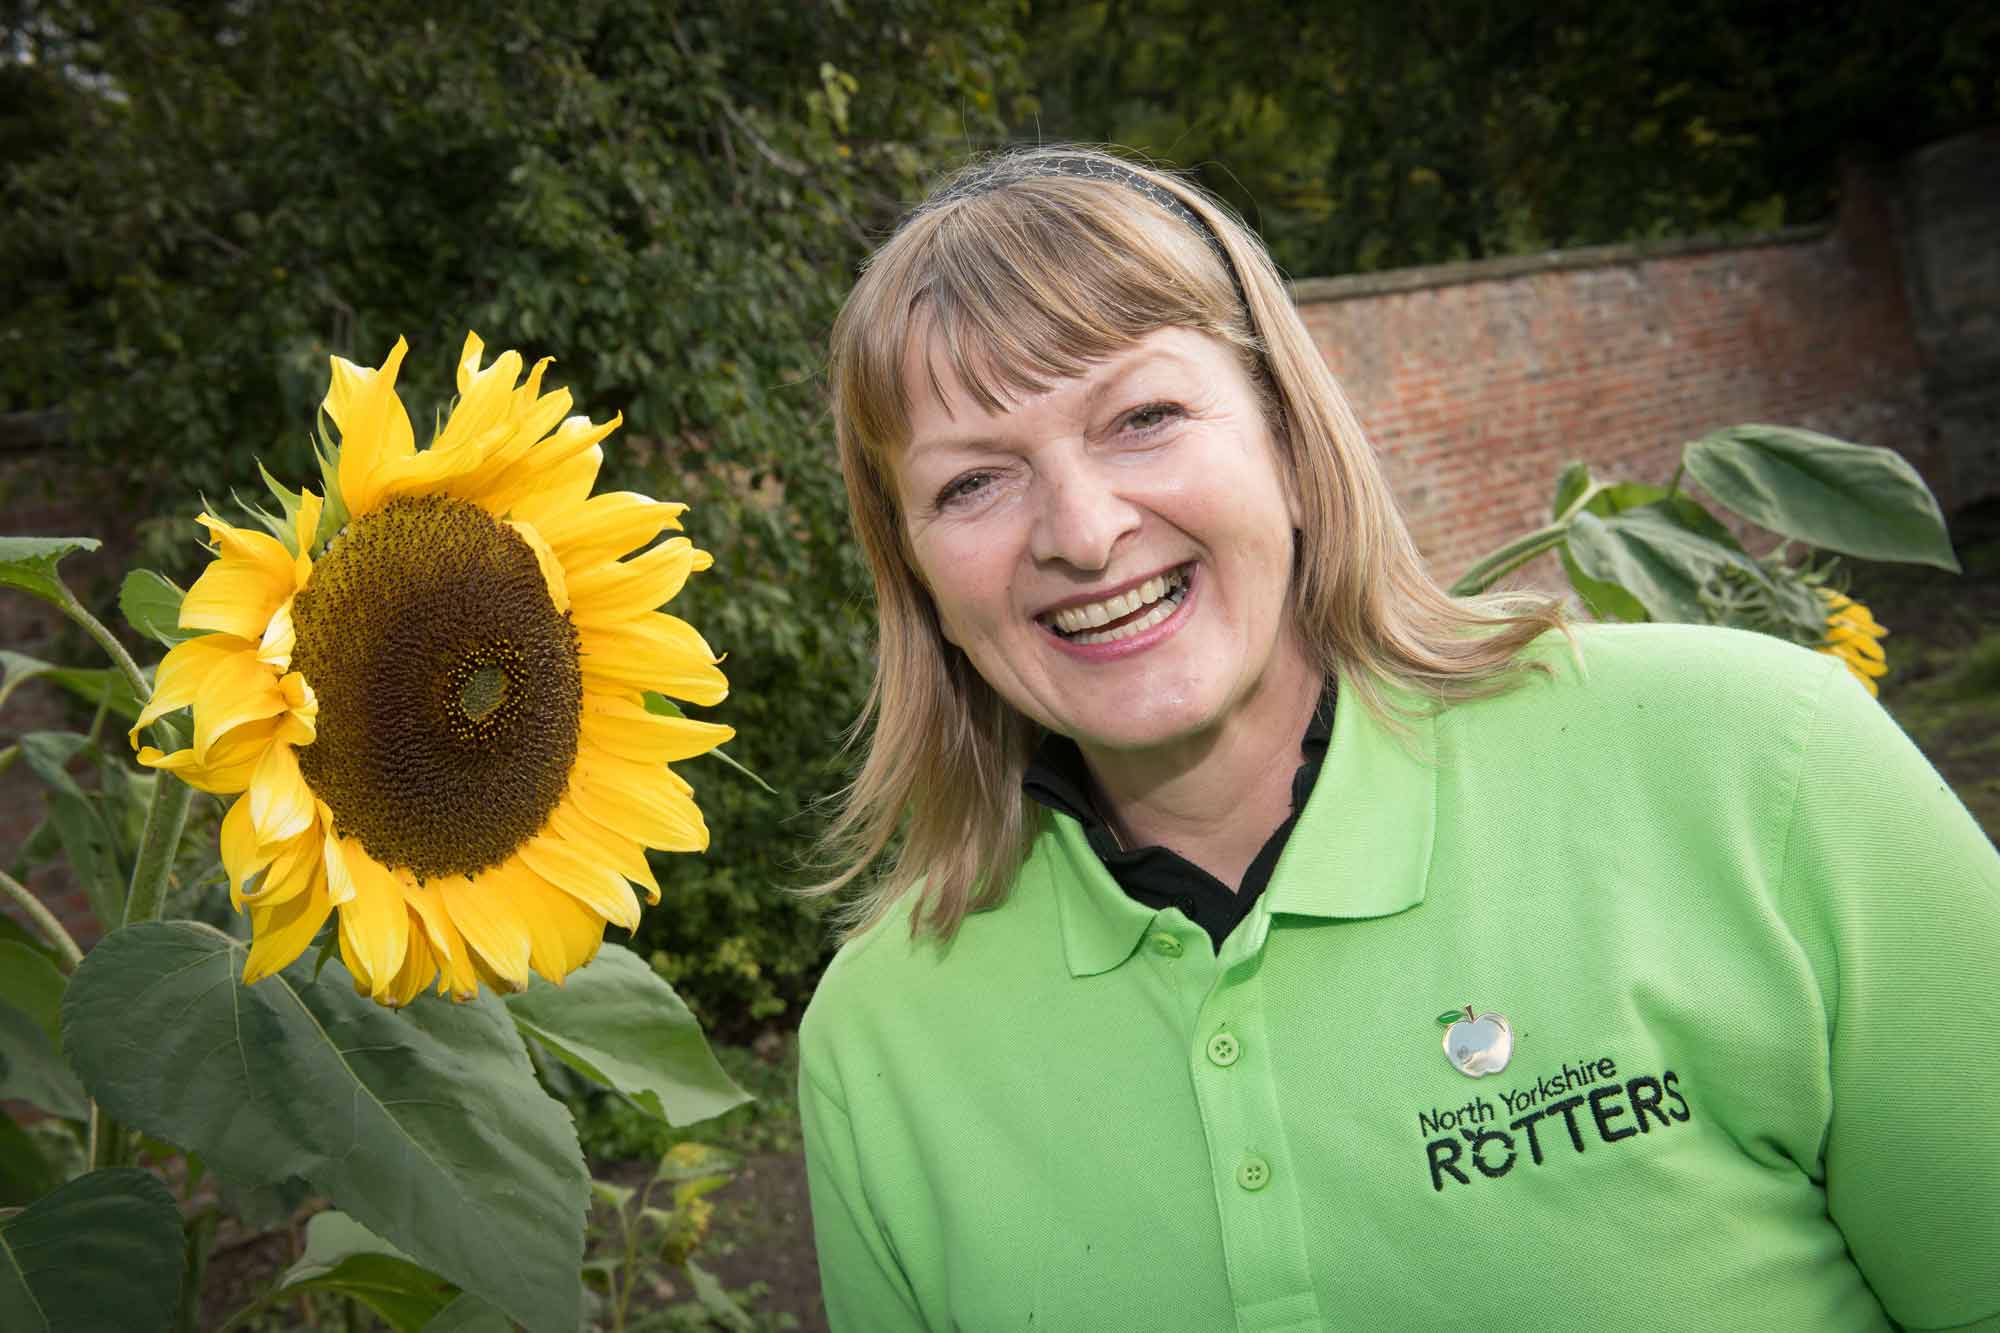 Rotter Pauline Percival, who was awarded the ‘golden apple’ for her ten years with the team